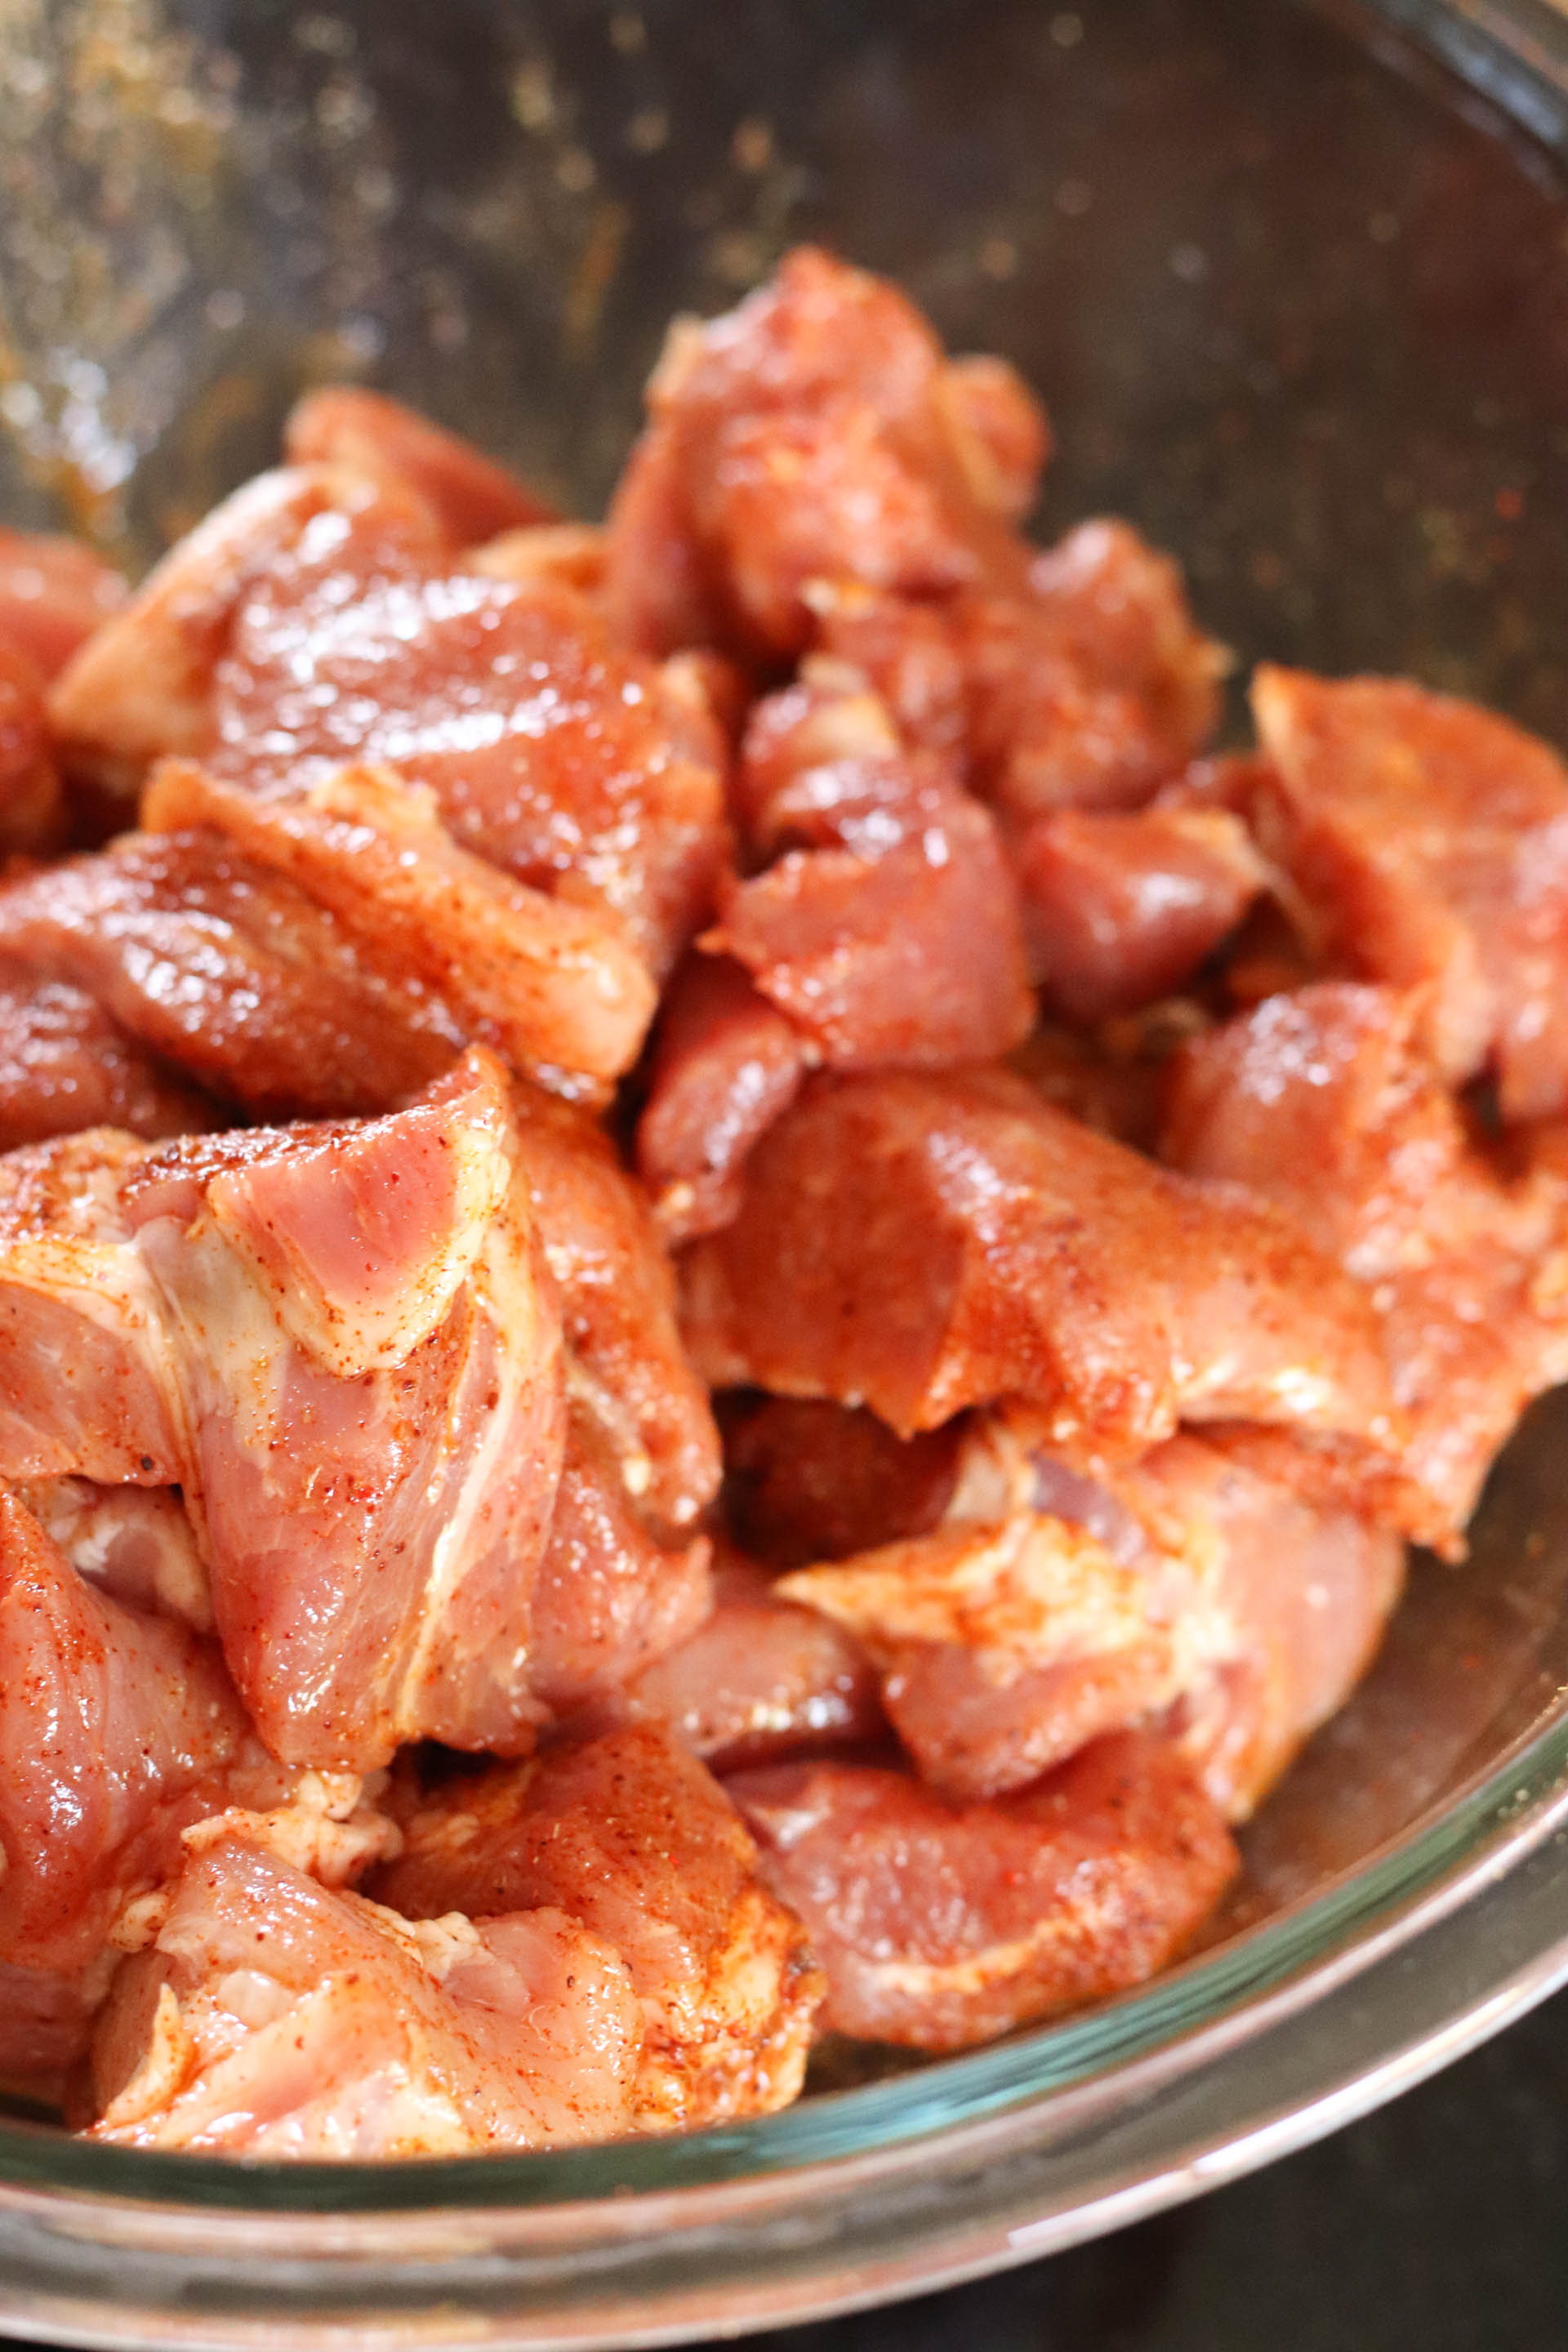 Pork tossed with carnita seasoning in a bowl